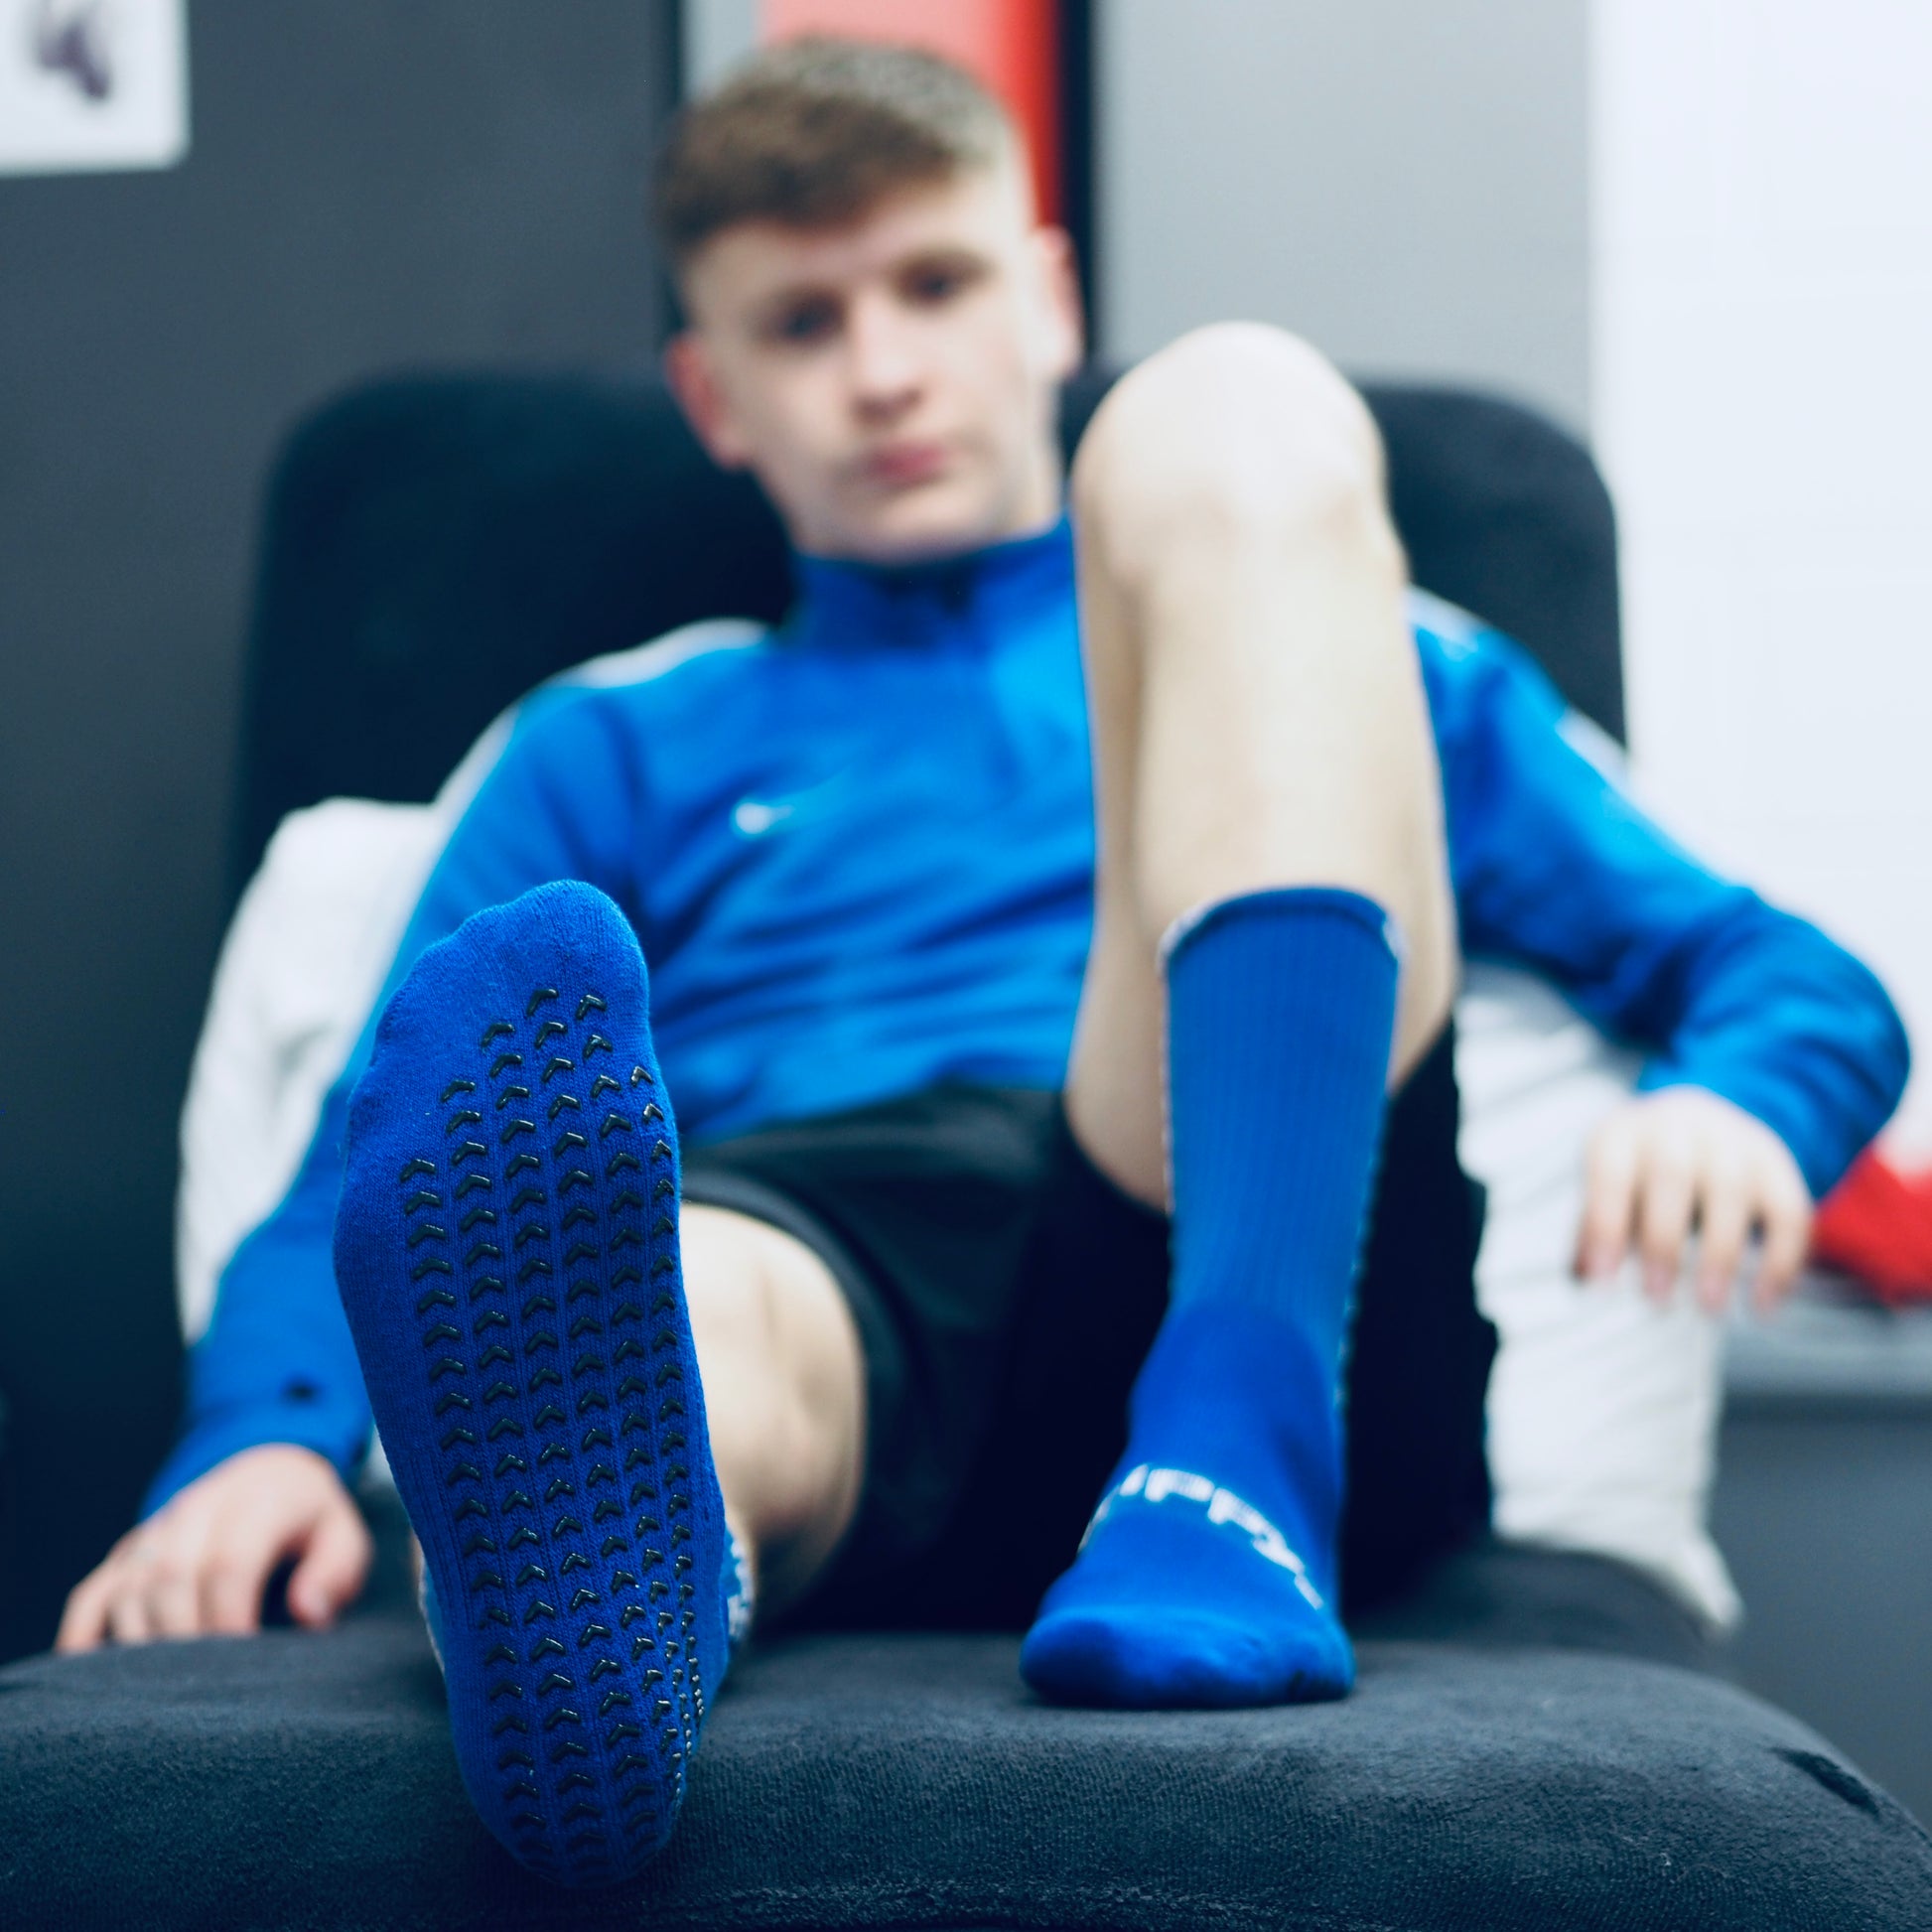 Socks for sports, fitness and training with grip, anti-slip